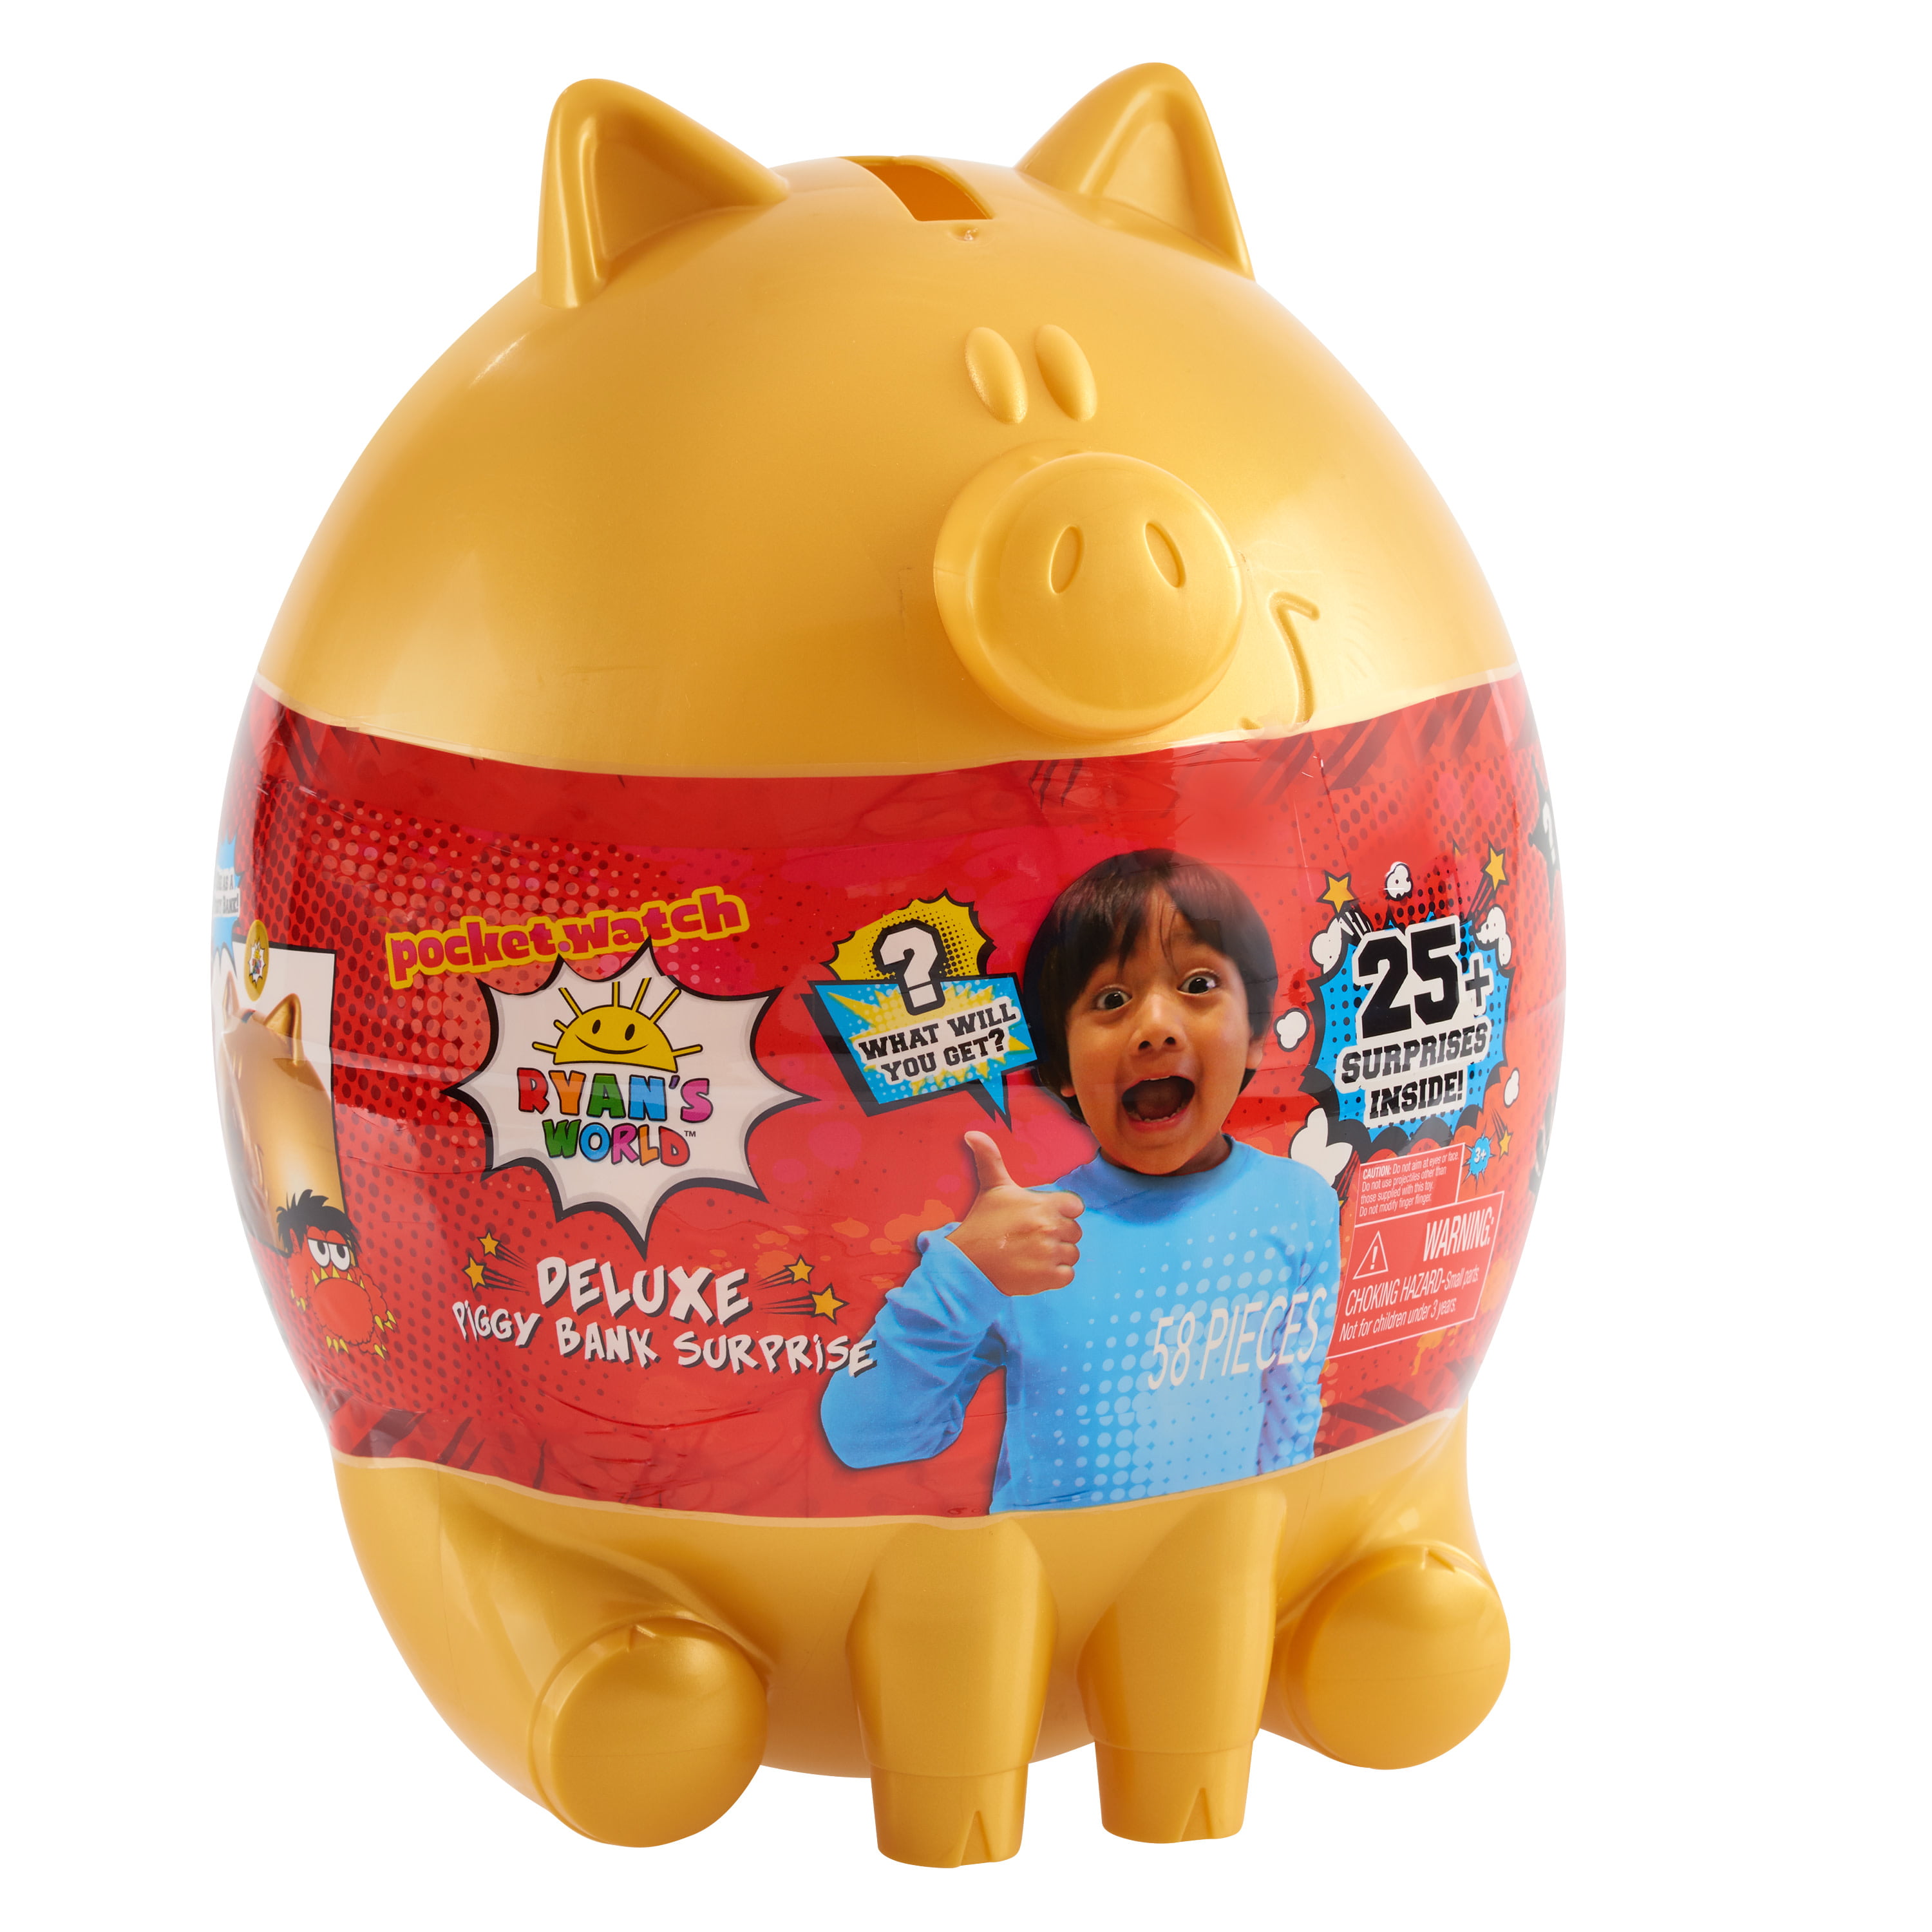 New Limited Ryan’s World Deluxe Gold Piggy Bank Surprise New Free Shipping